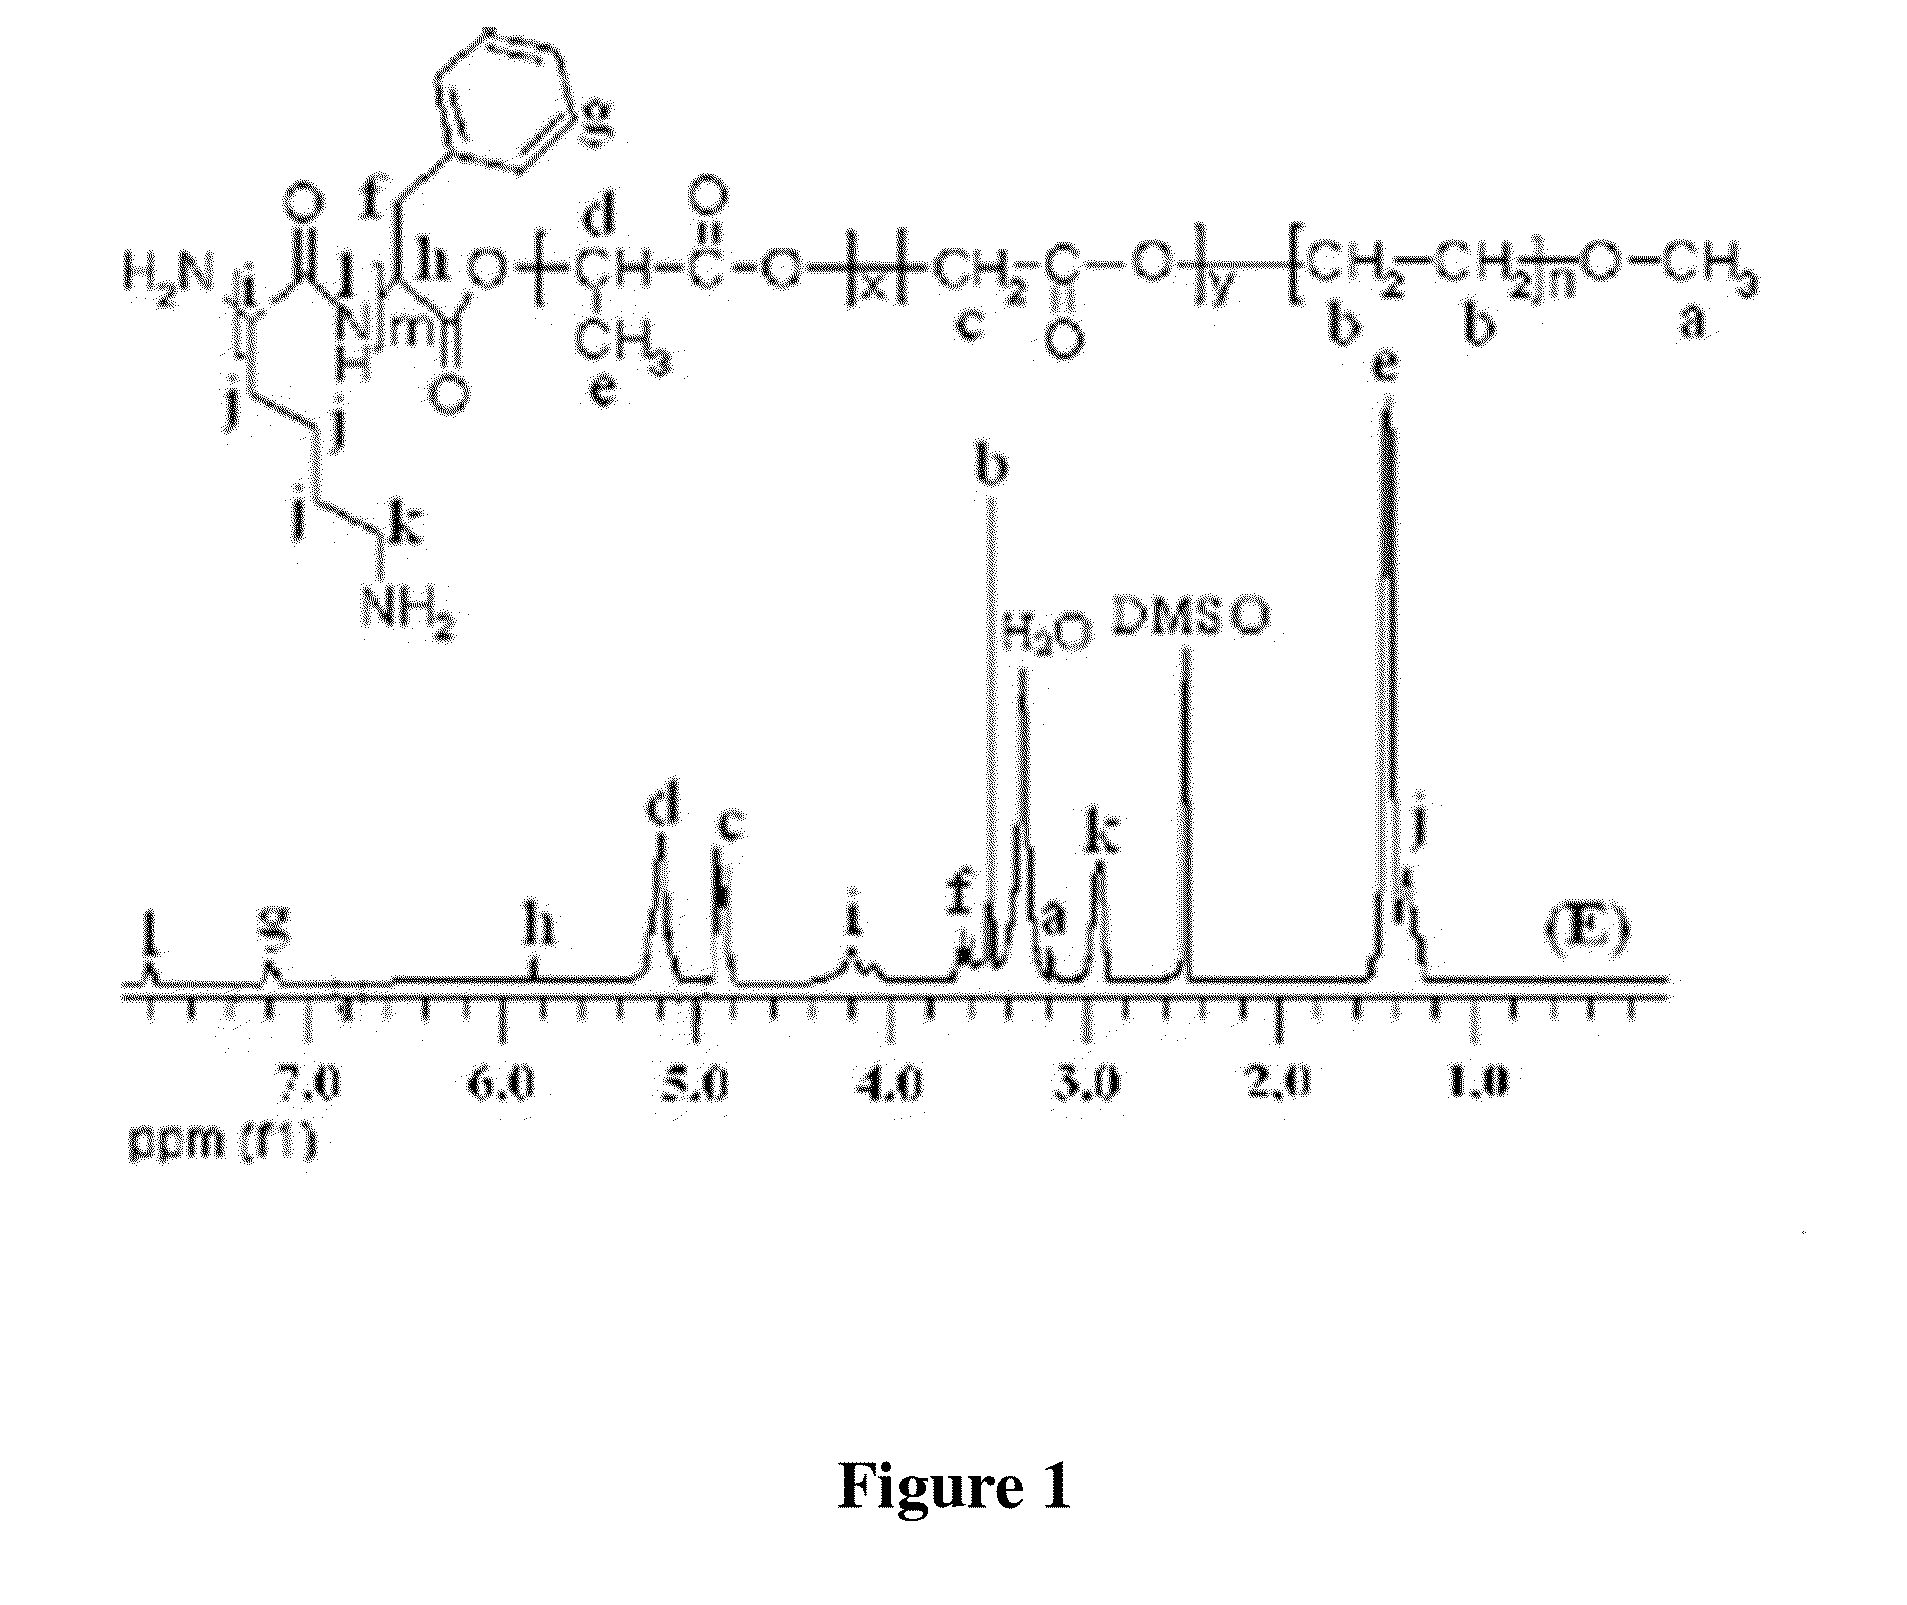 Peg-plga-pll polymer and method for preparing and using the same as the drug and gene carrier